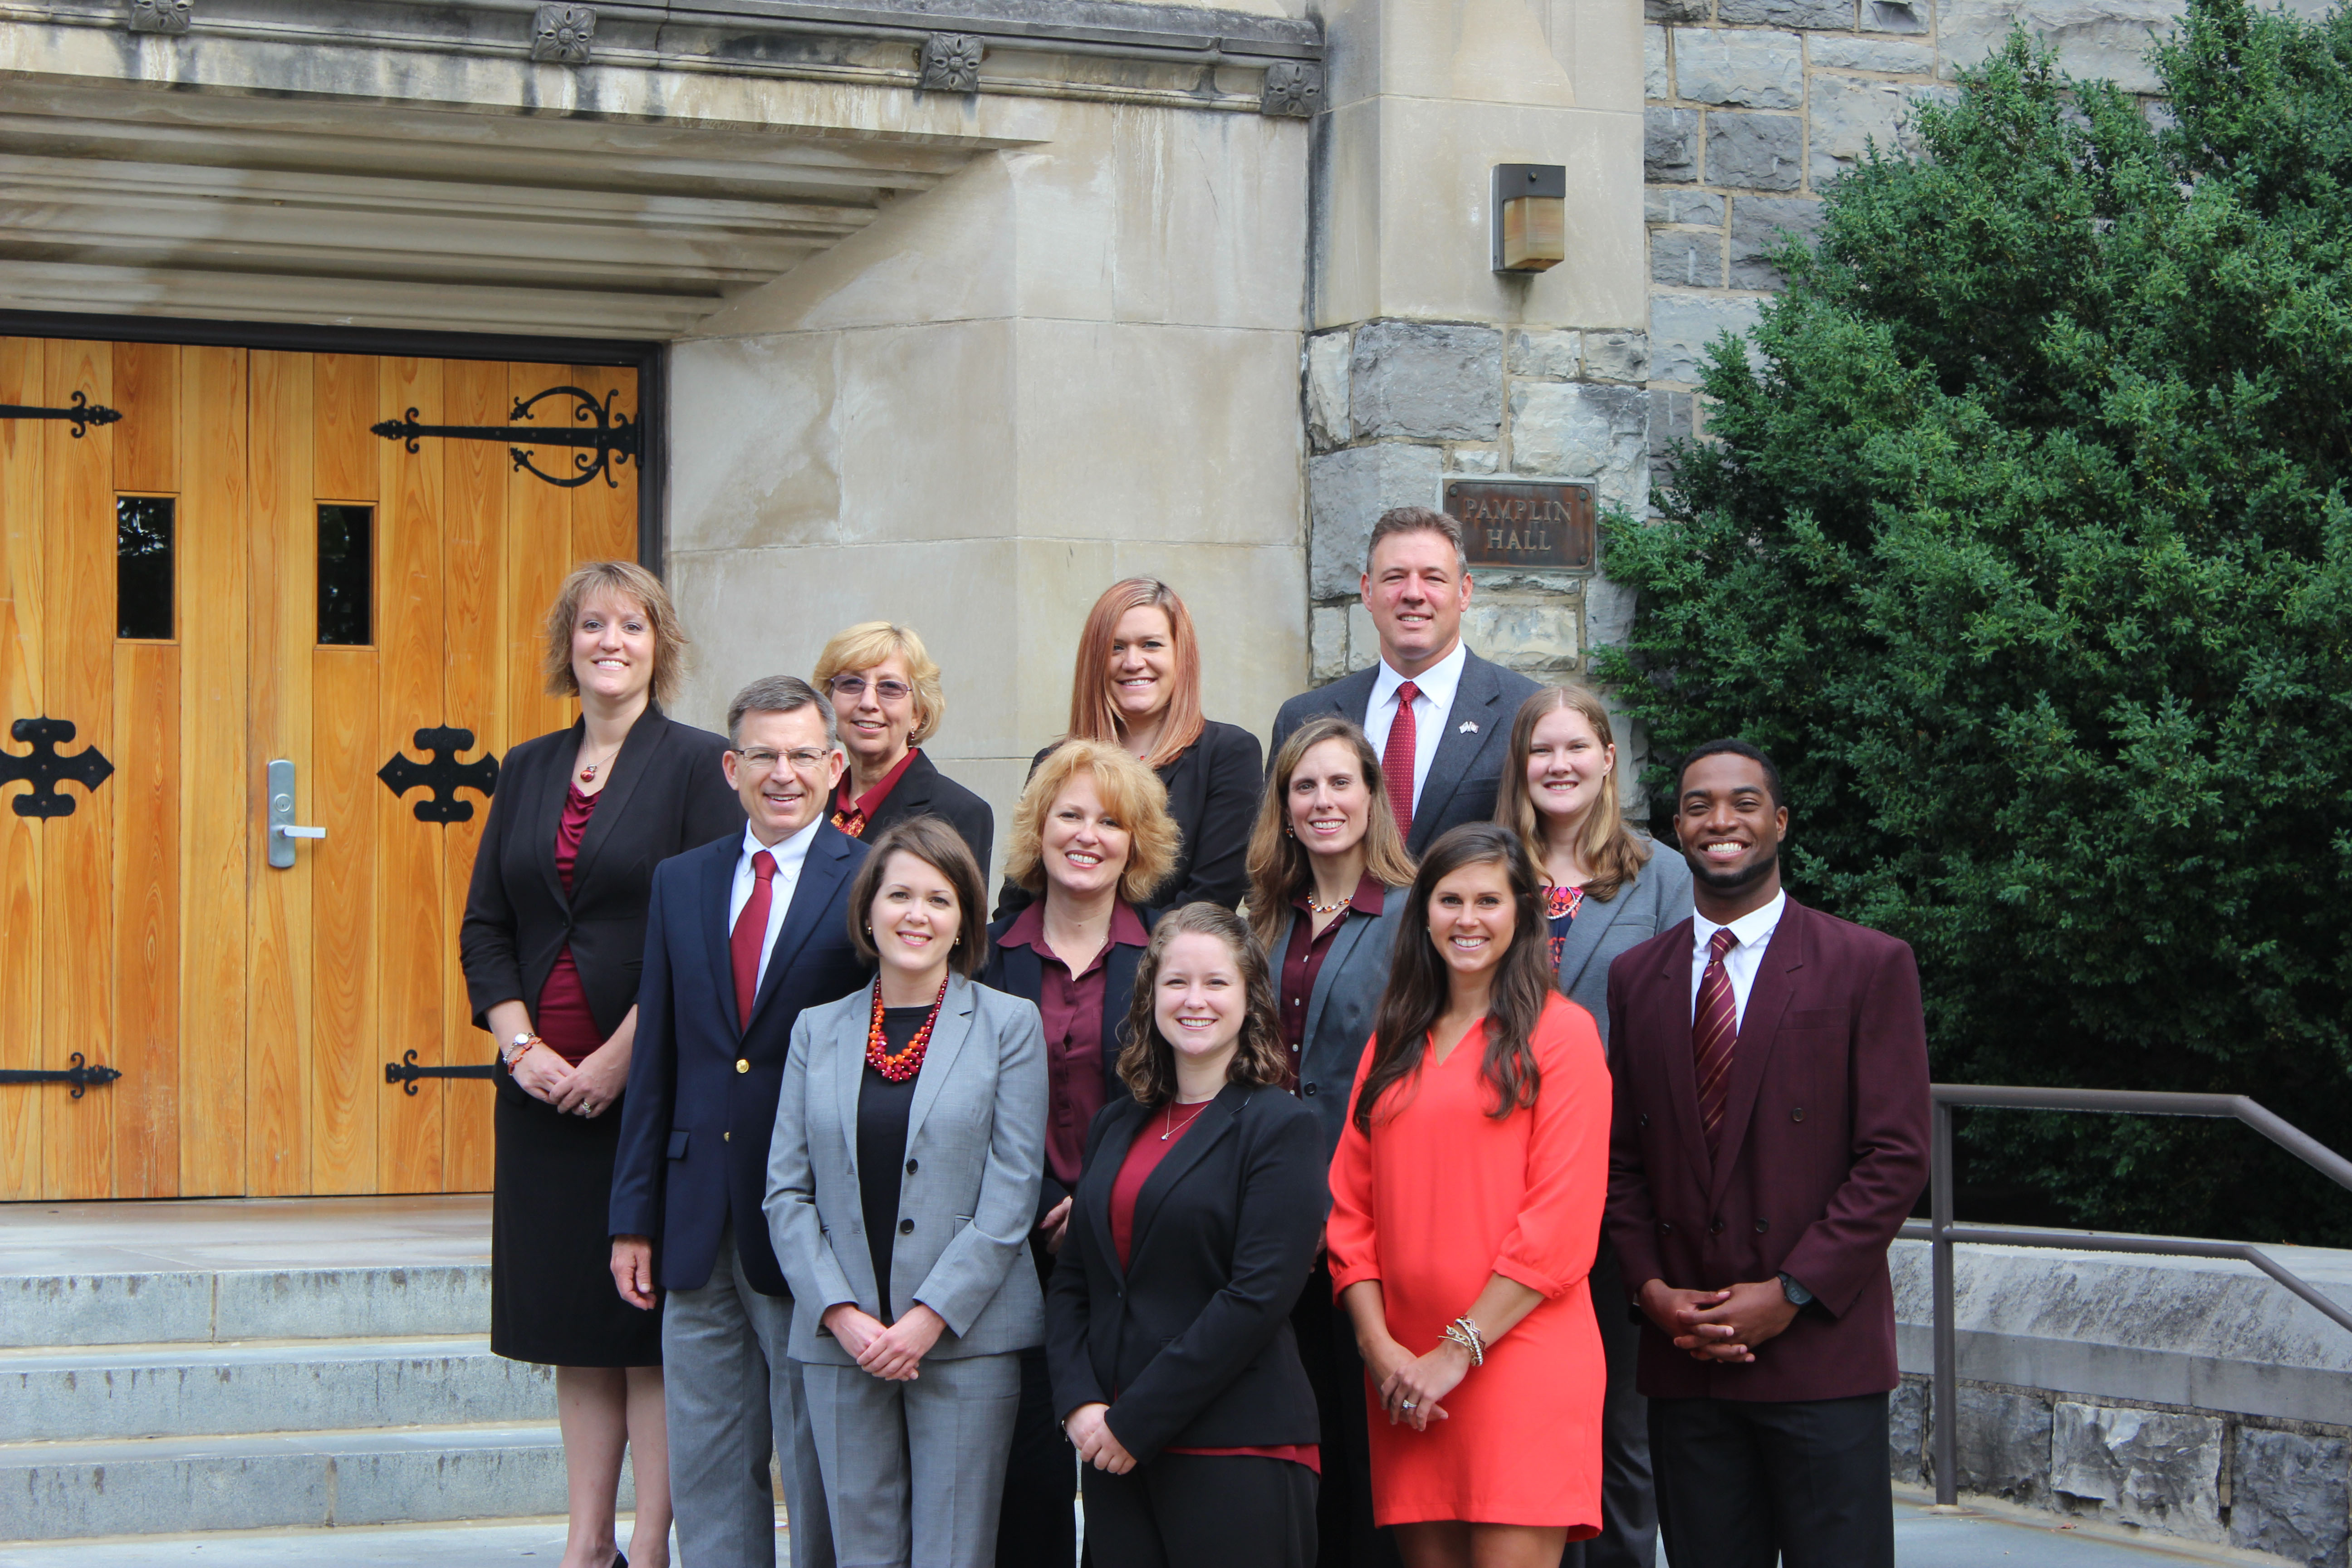 The Pamplin academic advising team pose outside Pamplin Hall. (L to R) Back Row: Leigh Anne Byrd, Lorraine Borny, Lindsey Ramey, Justin Monday; Middle Row: Keith Gay, Jennifer Clevenger, Kirsten Mosby, Christina Minford; Front Row: Kelley Ausman, Alison Wade, Katie Wells, Lorenzo Williams